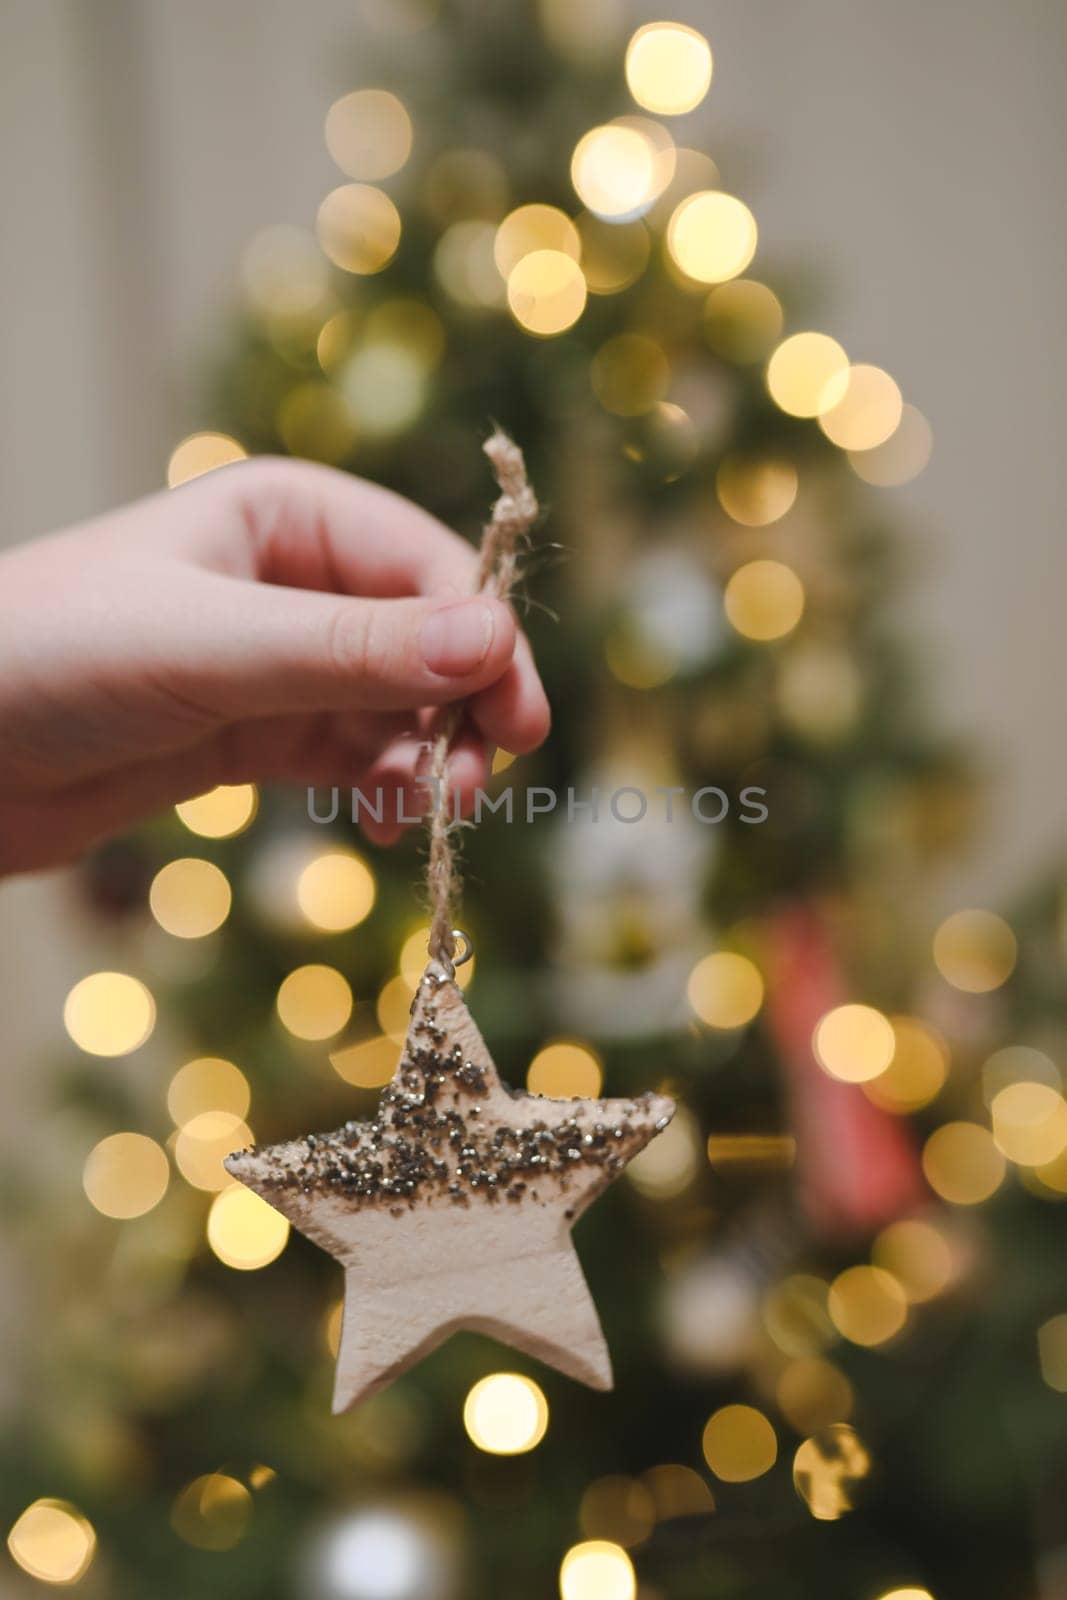 Decorating Christmas tree, holding Christmas toy in a hand. Holiday, Christmas and New Year family celebration concept.